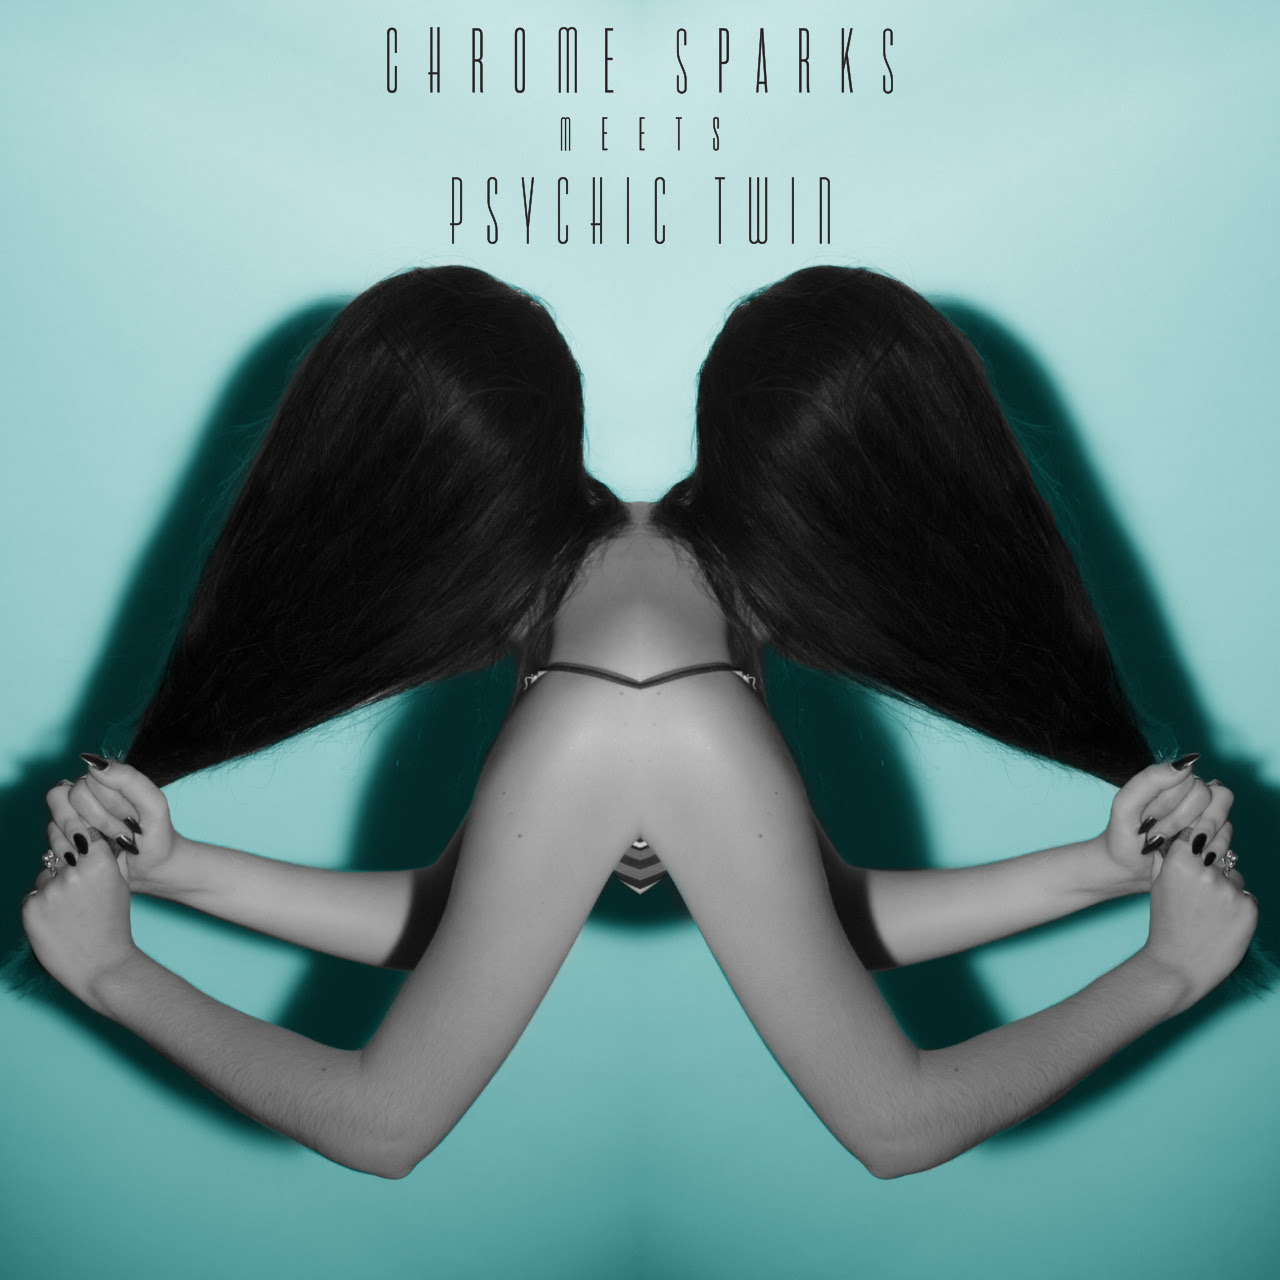 Psychic Twin and Chrome Sparks, share new Mixtape, 'Chrome Sparks Meets Psychic Twin mixtape.'